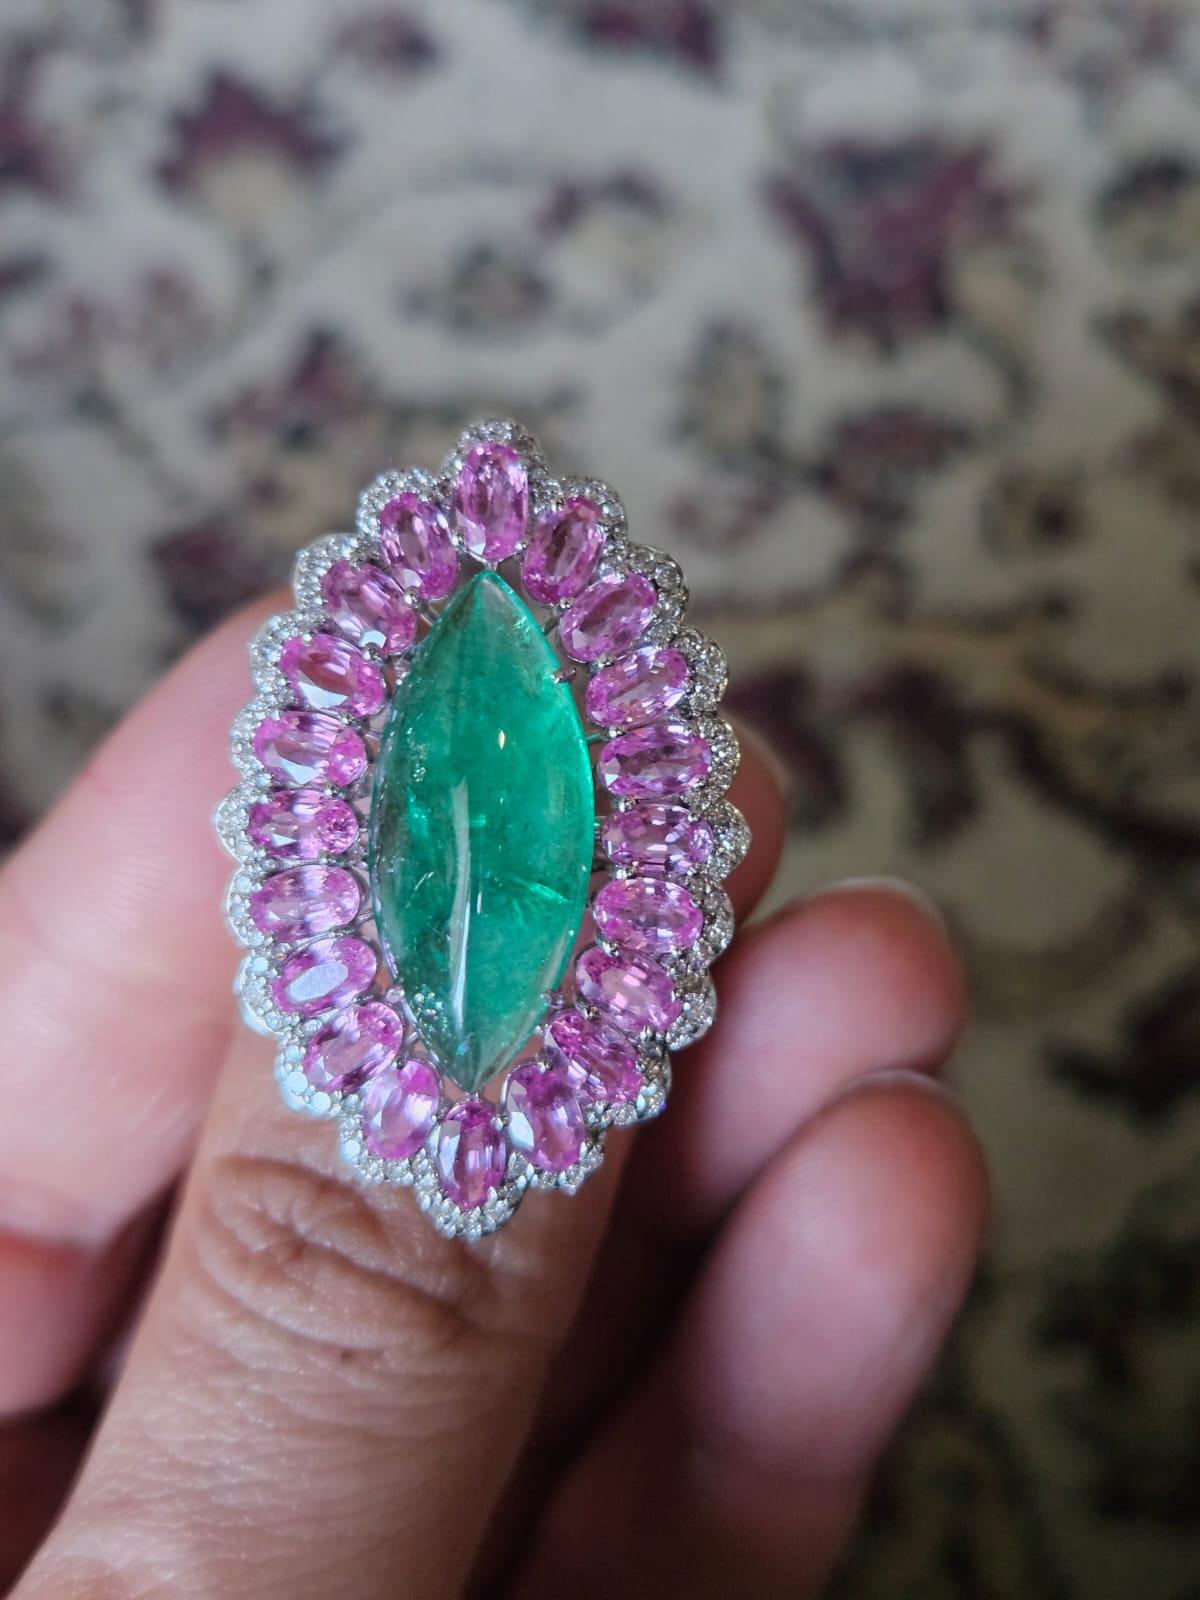 A very gorgeous and beautiful, classic style, Emerald & Pink Sapphire Cocktail Ring set in 18K White Gold & Diamonds. The weight of the marquise shaped Emerald cabochon is 6.72 carats. The Emerald is completely natural, without any treatment and is